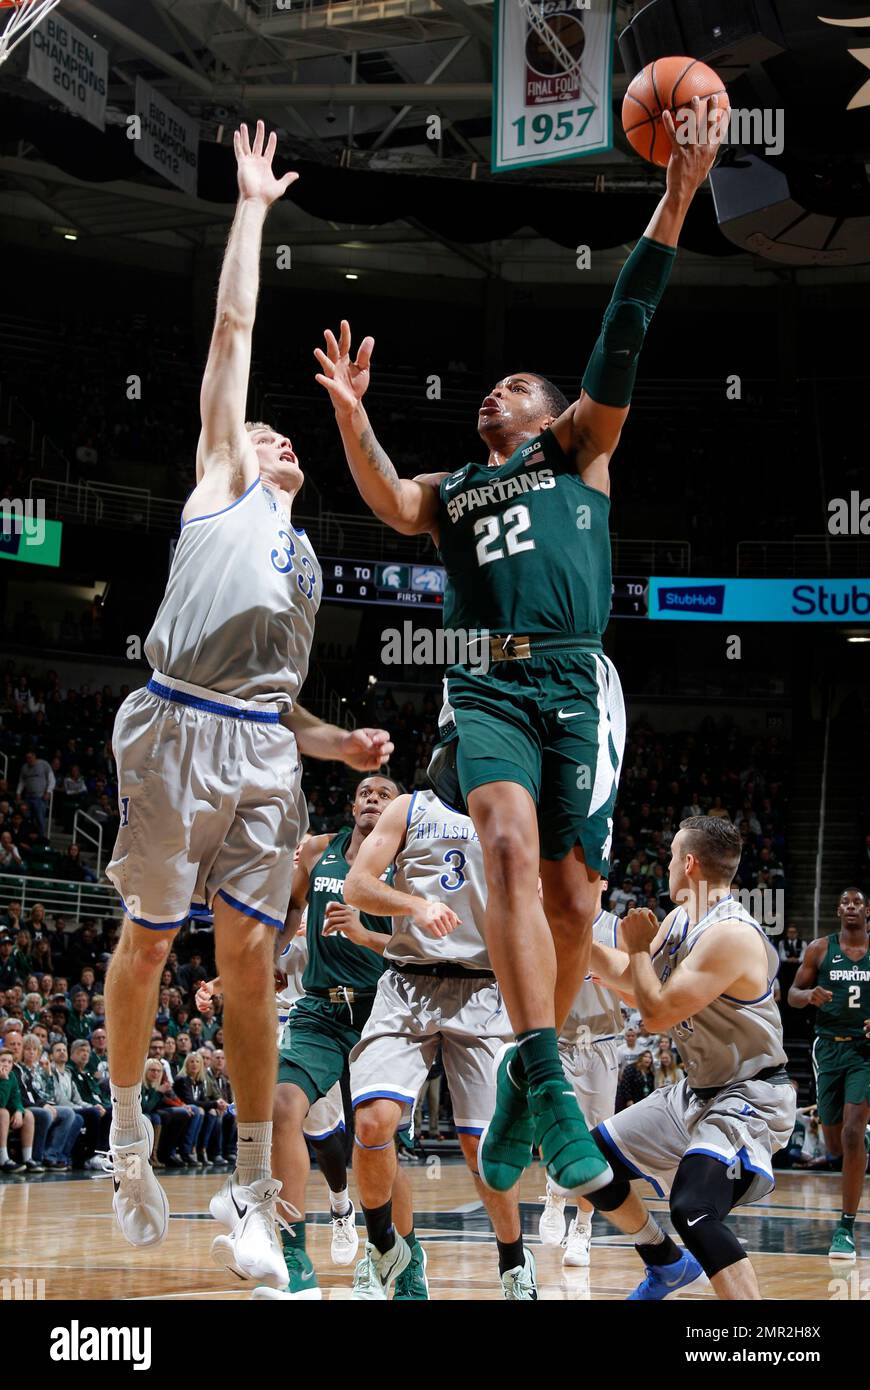 Michigan State's Miles Bridges, right, puts up a shot against Hillsdale